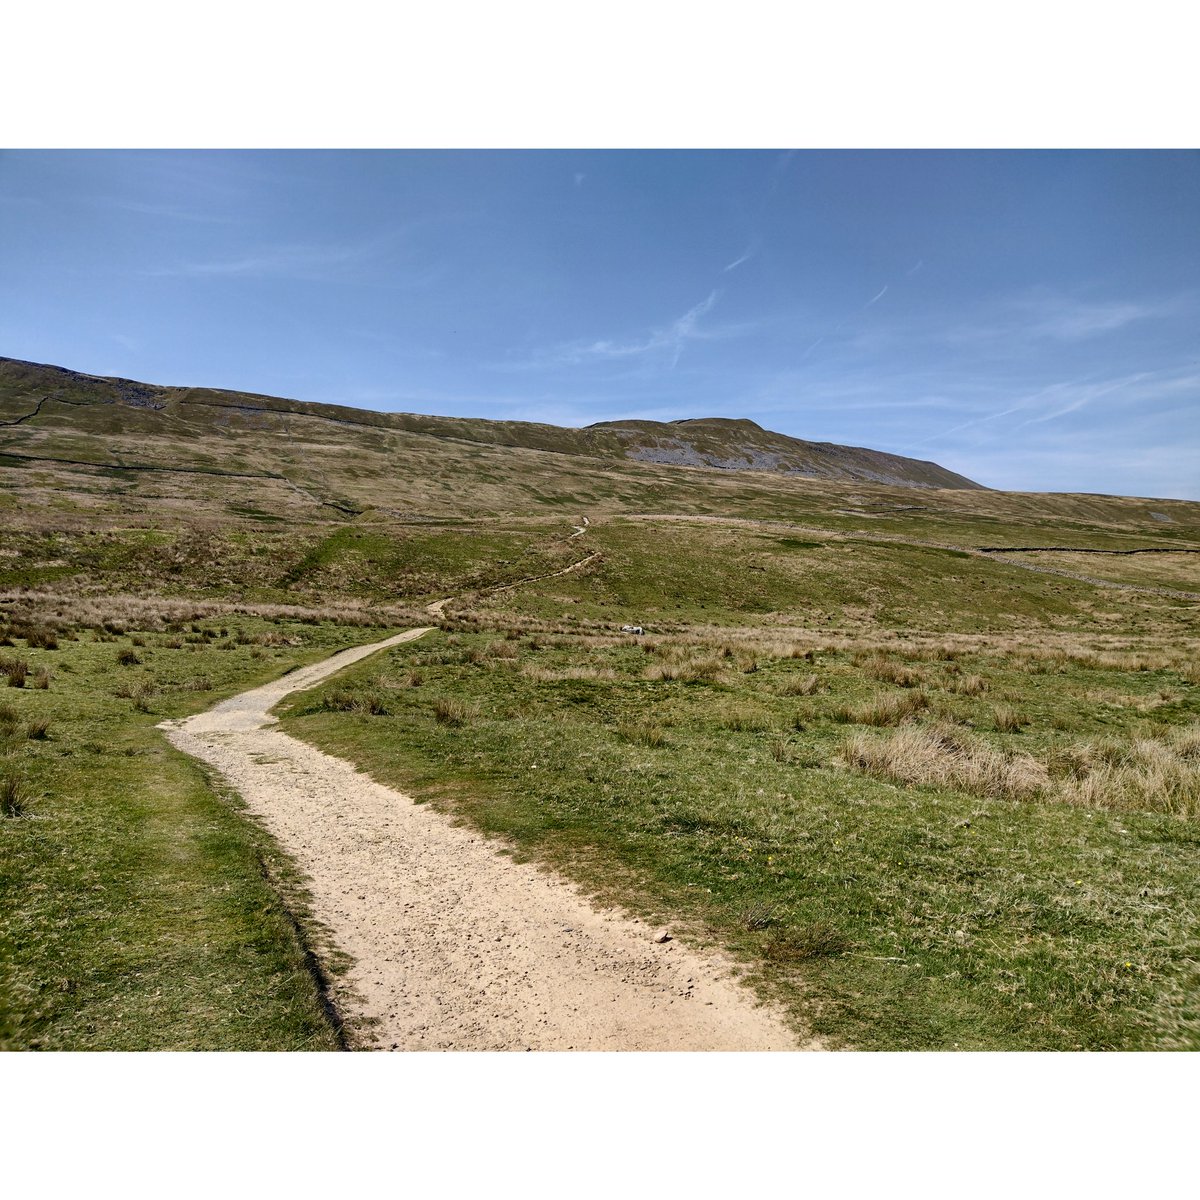 Fine weekend to bag #Whernside, highest of the three peaks at 736 metres - lots of walkers and a friendly atmosphere 
#HalifaxHipster #ThreePeaks
🏔️🚶